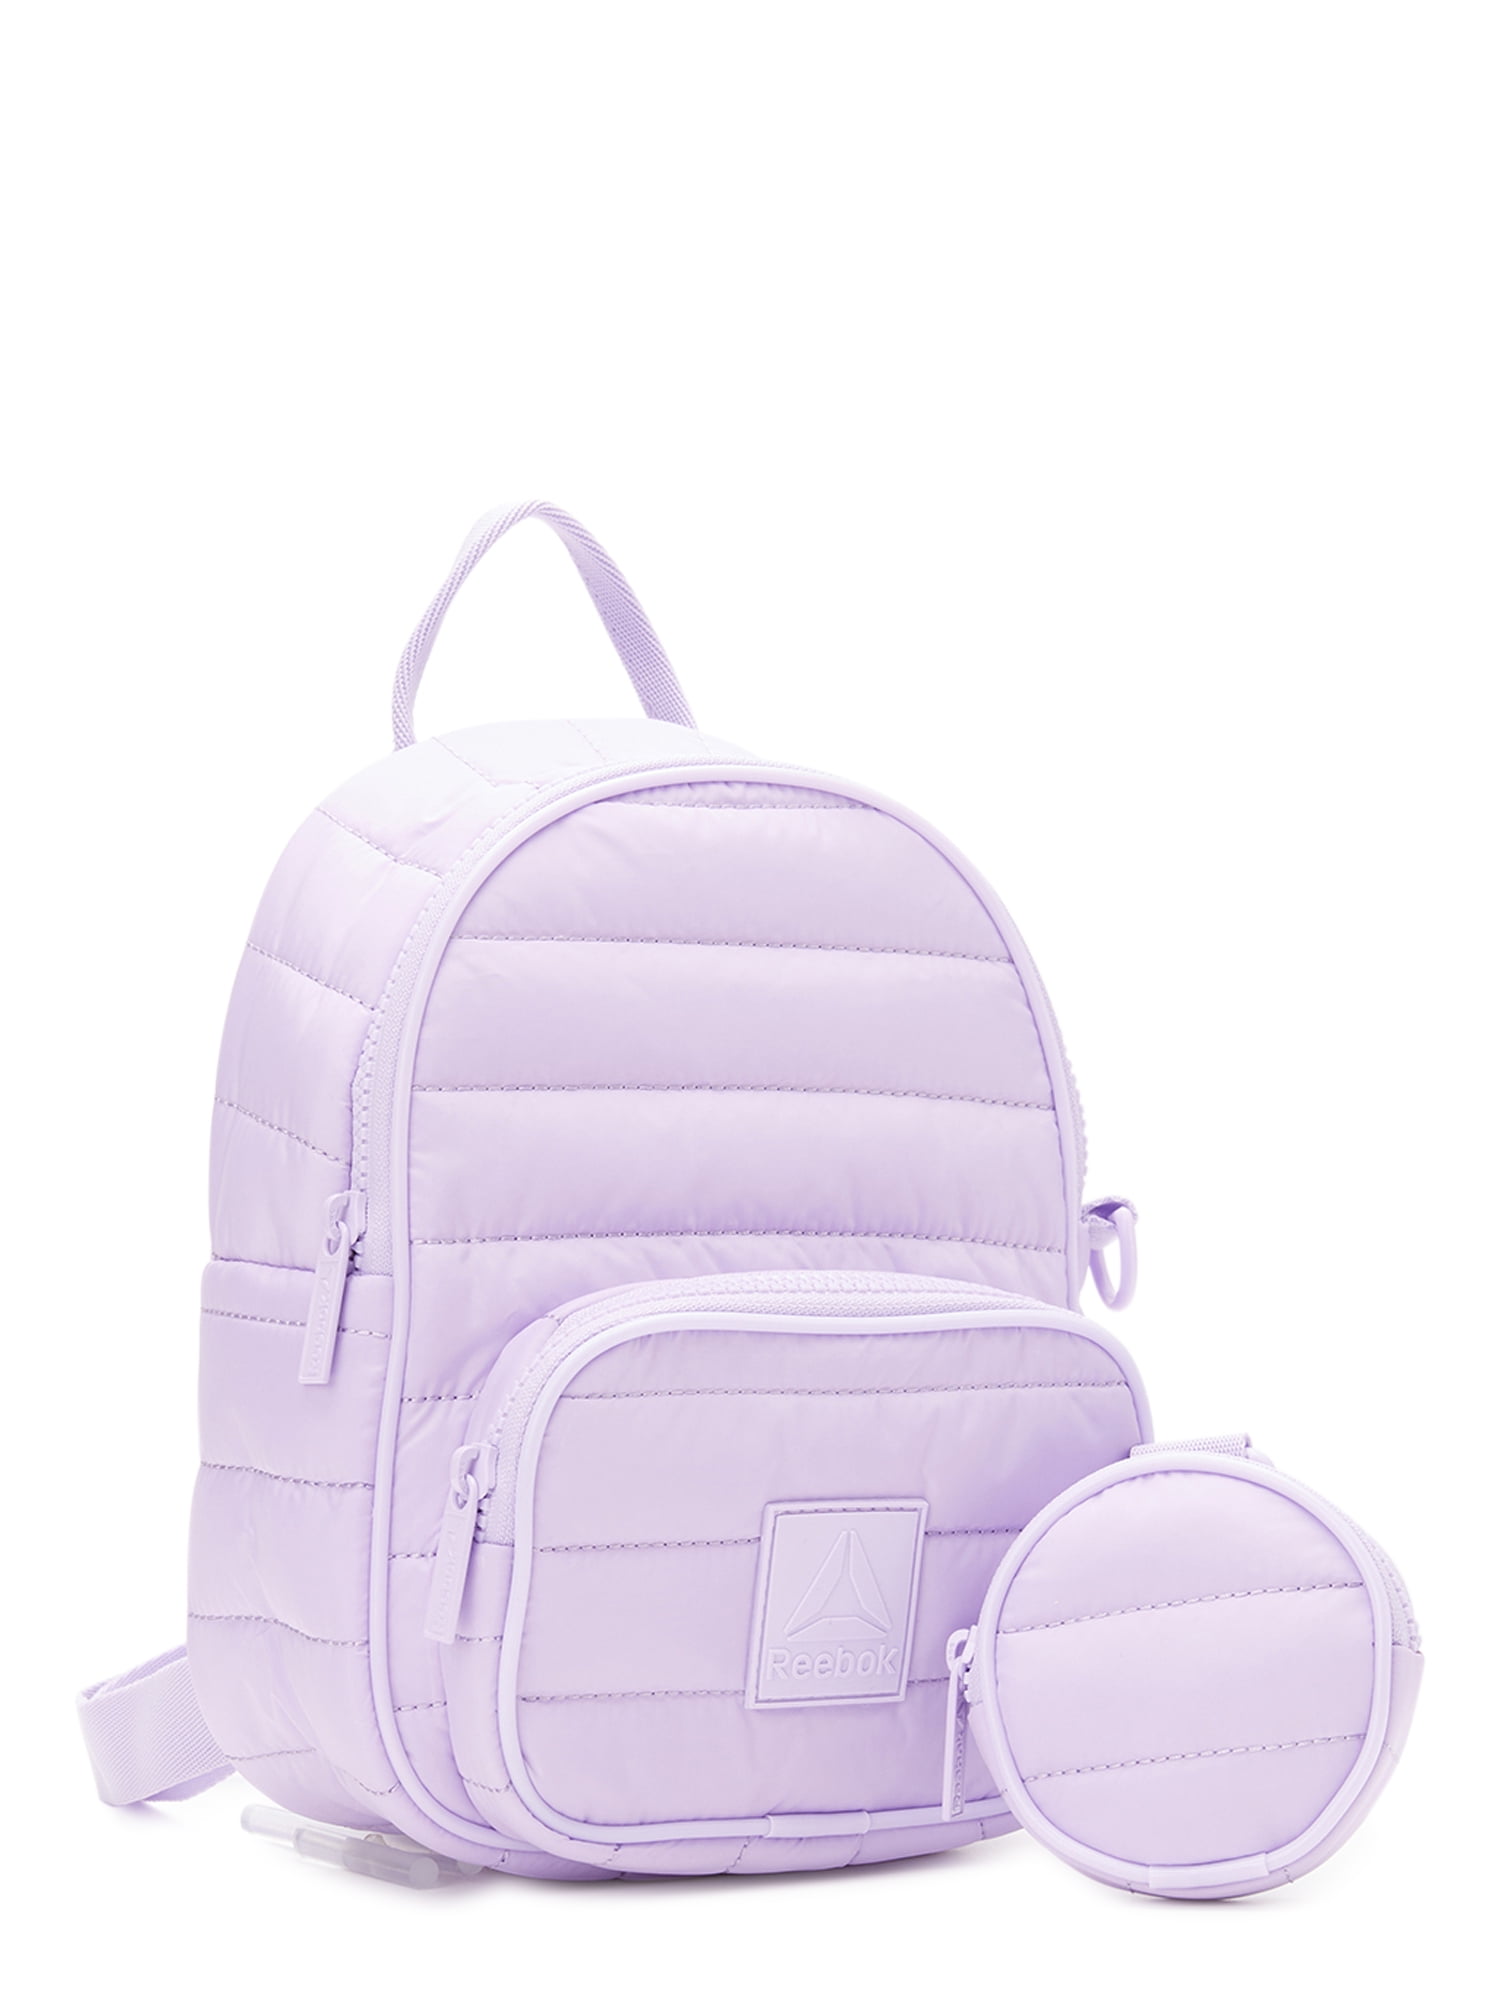 Reebok Women's Poppy Quilted Mini Backpack with Removable Pouch